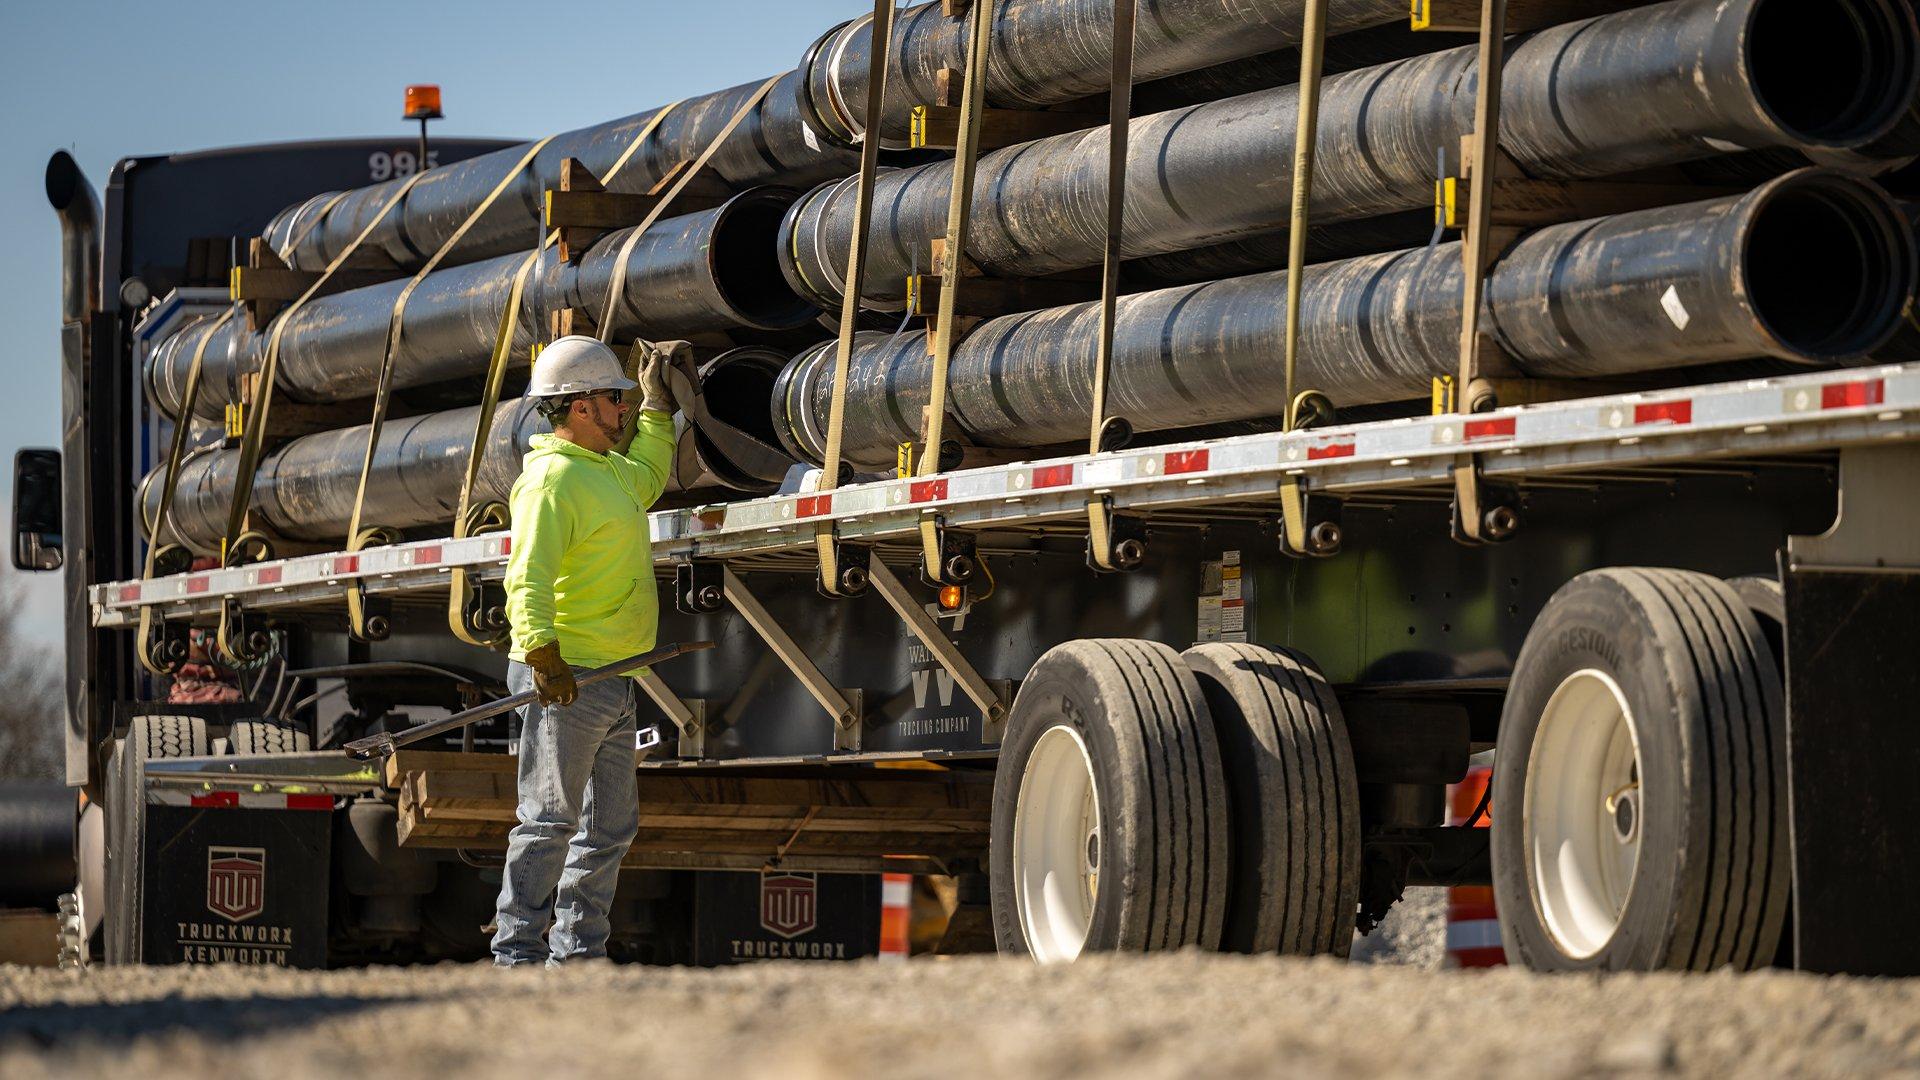 A worker wearing a hard hat checks stacks of black pipe secured on a truck flatbed.